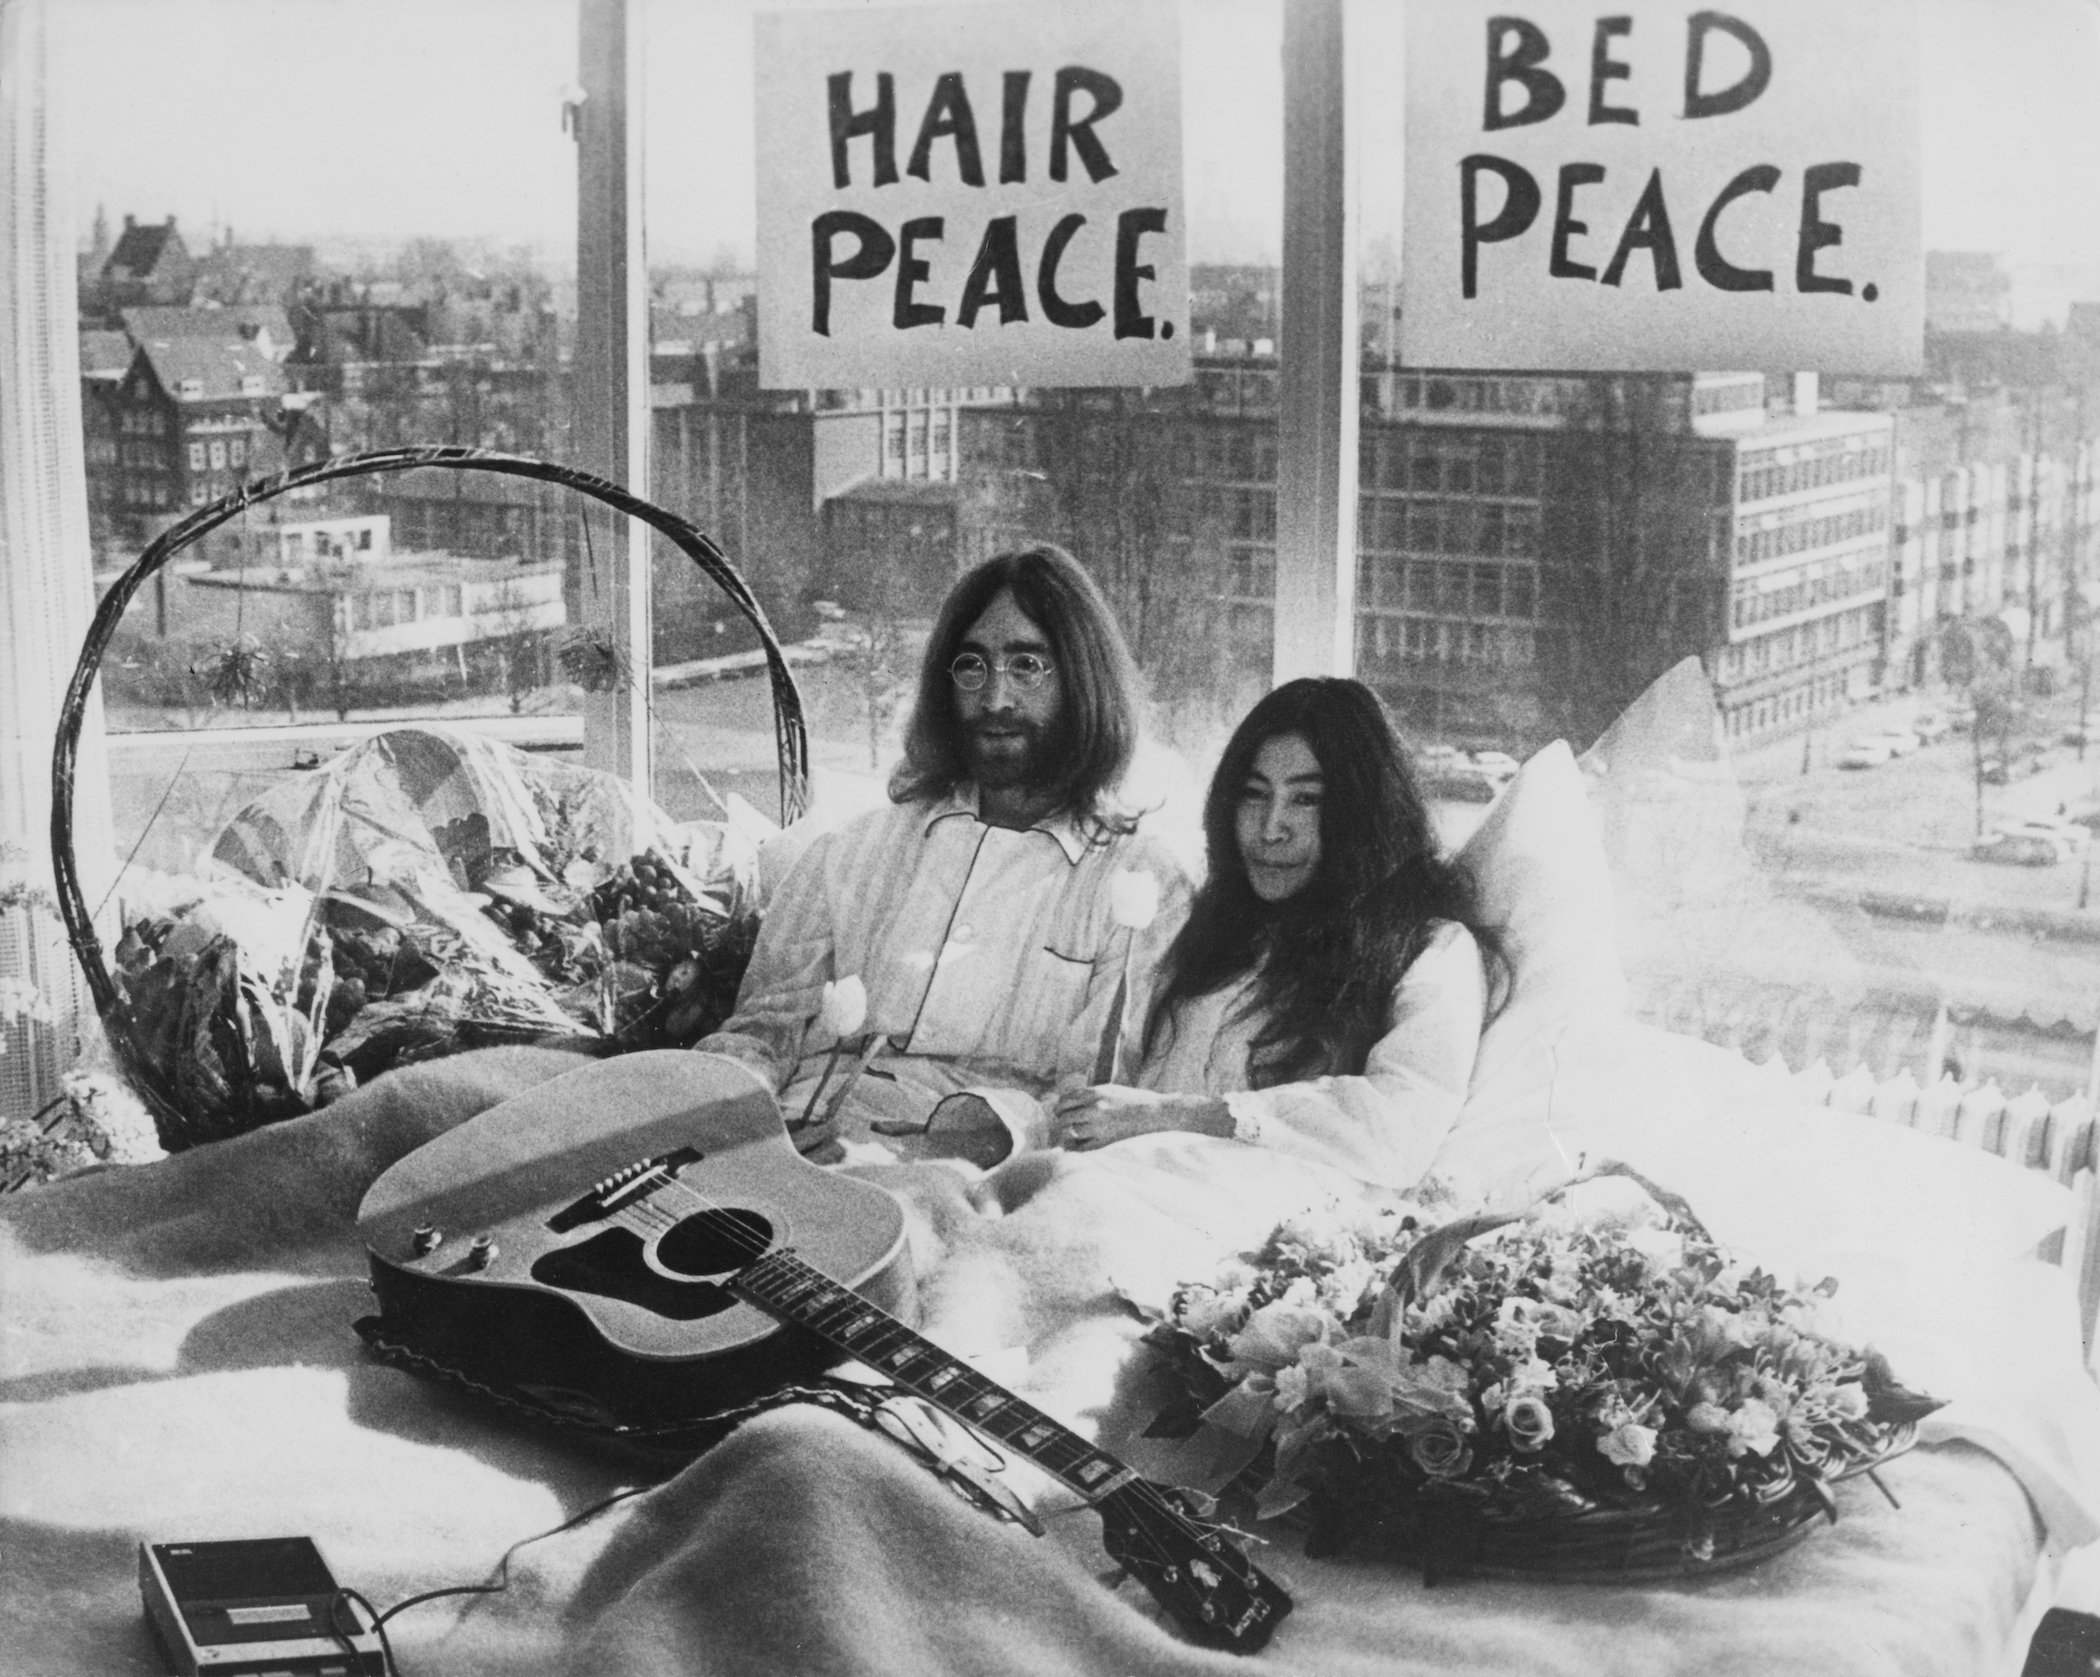 Beatle John Lennon (1940-1980) and his wife Yoko Ono in their bed in the Presidential Suite of the Hilton Hotel, Amsterdam